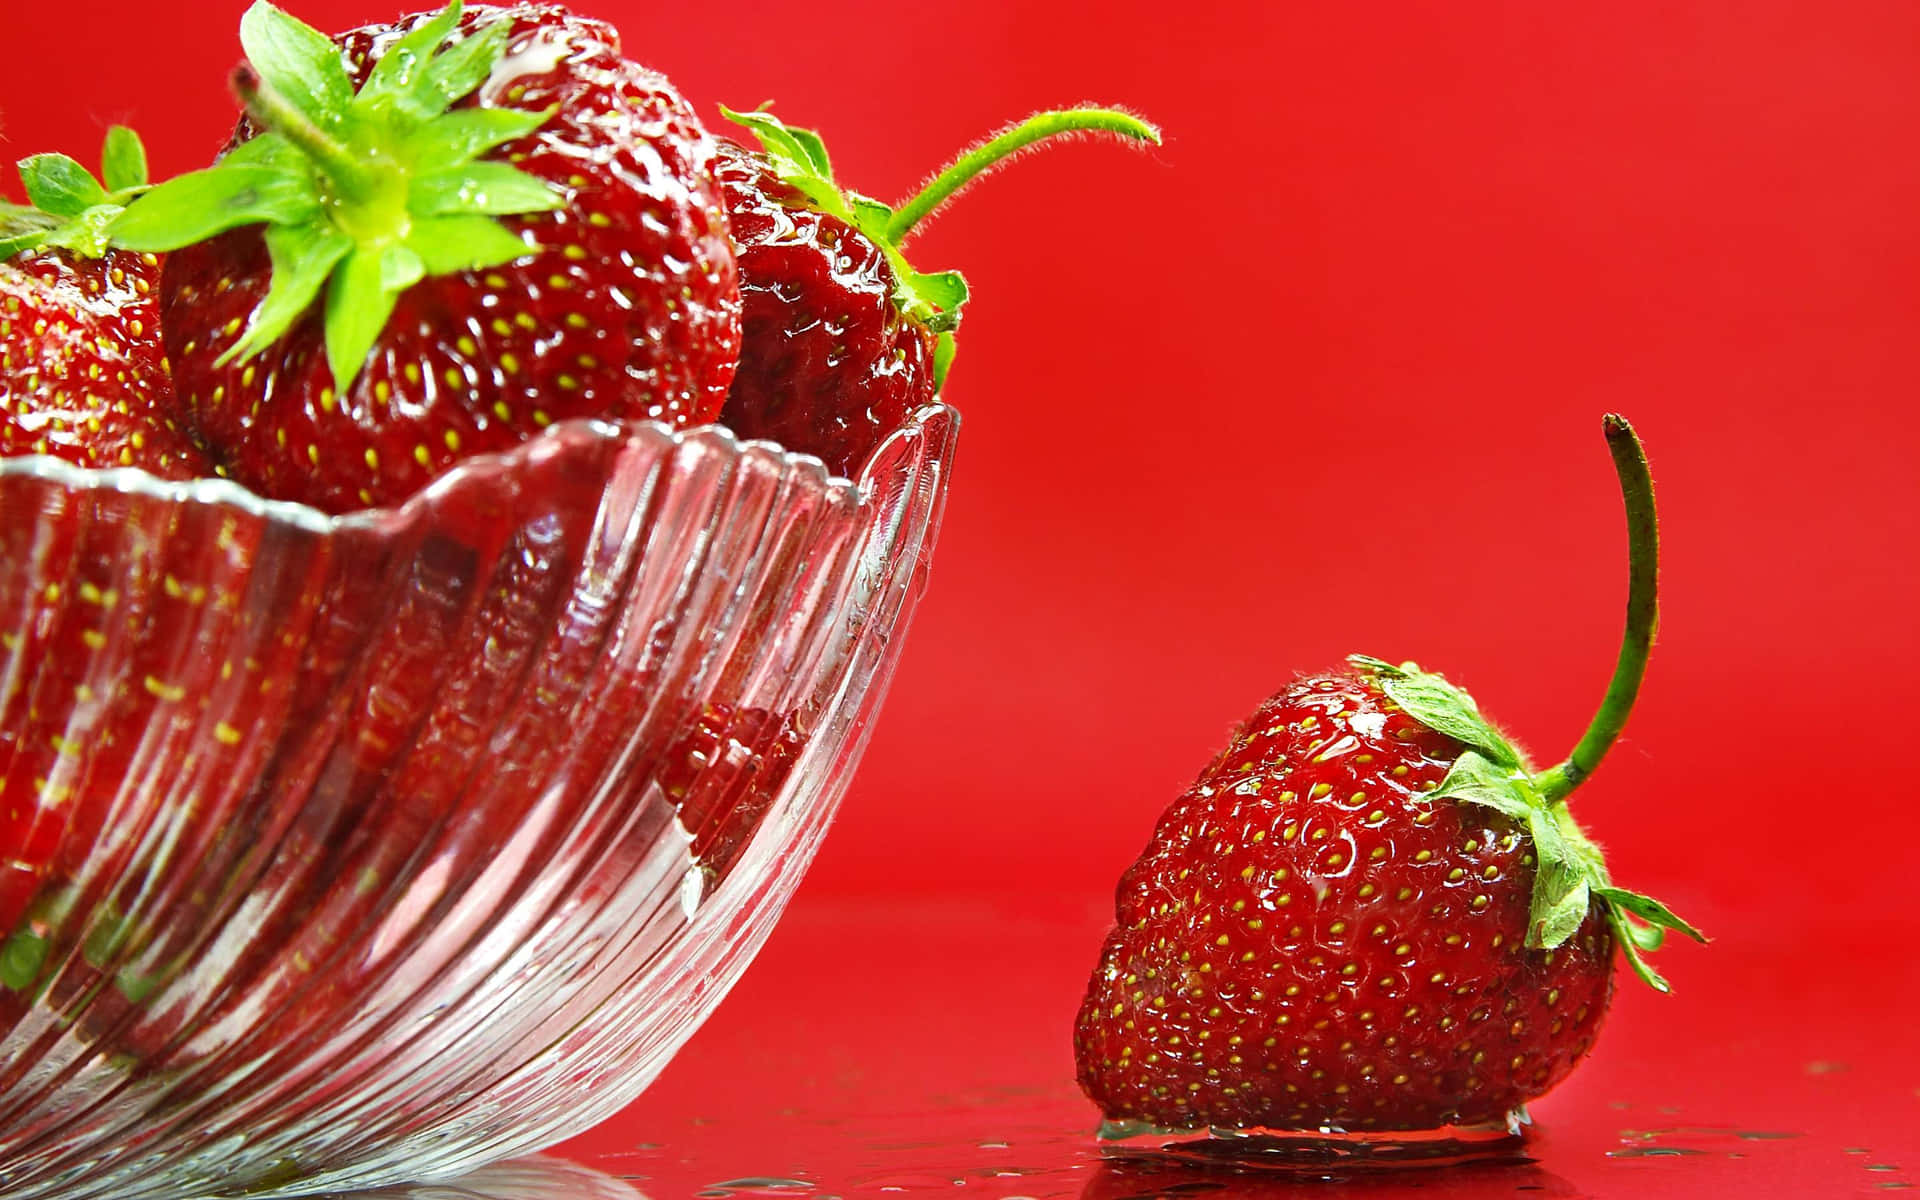 Sweet and juicy strawberries enjoy their delicious life on a scenic background.